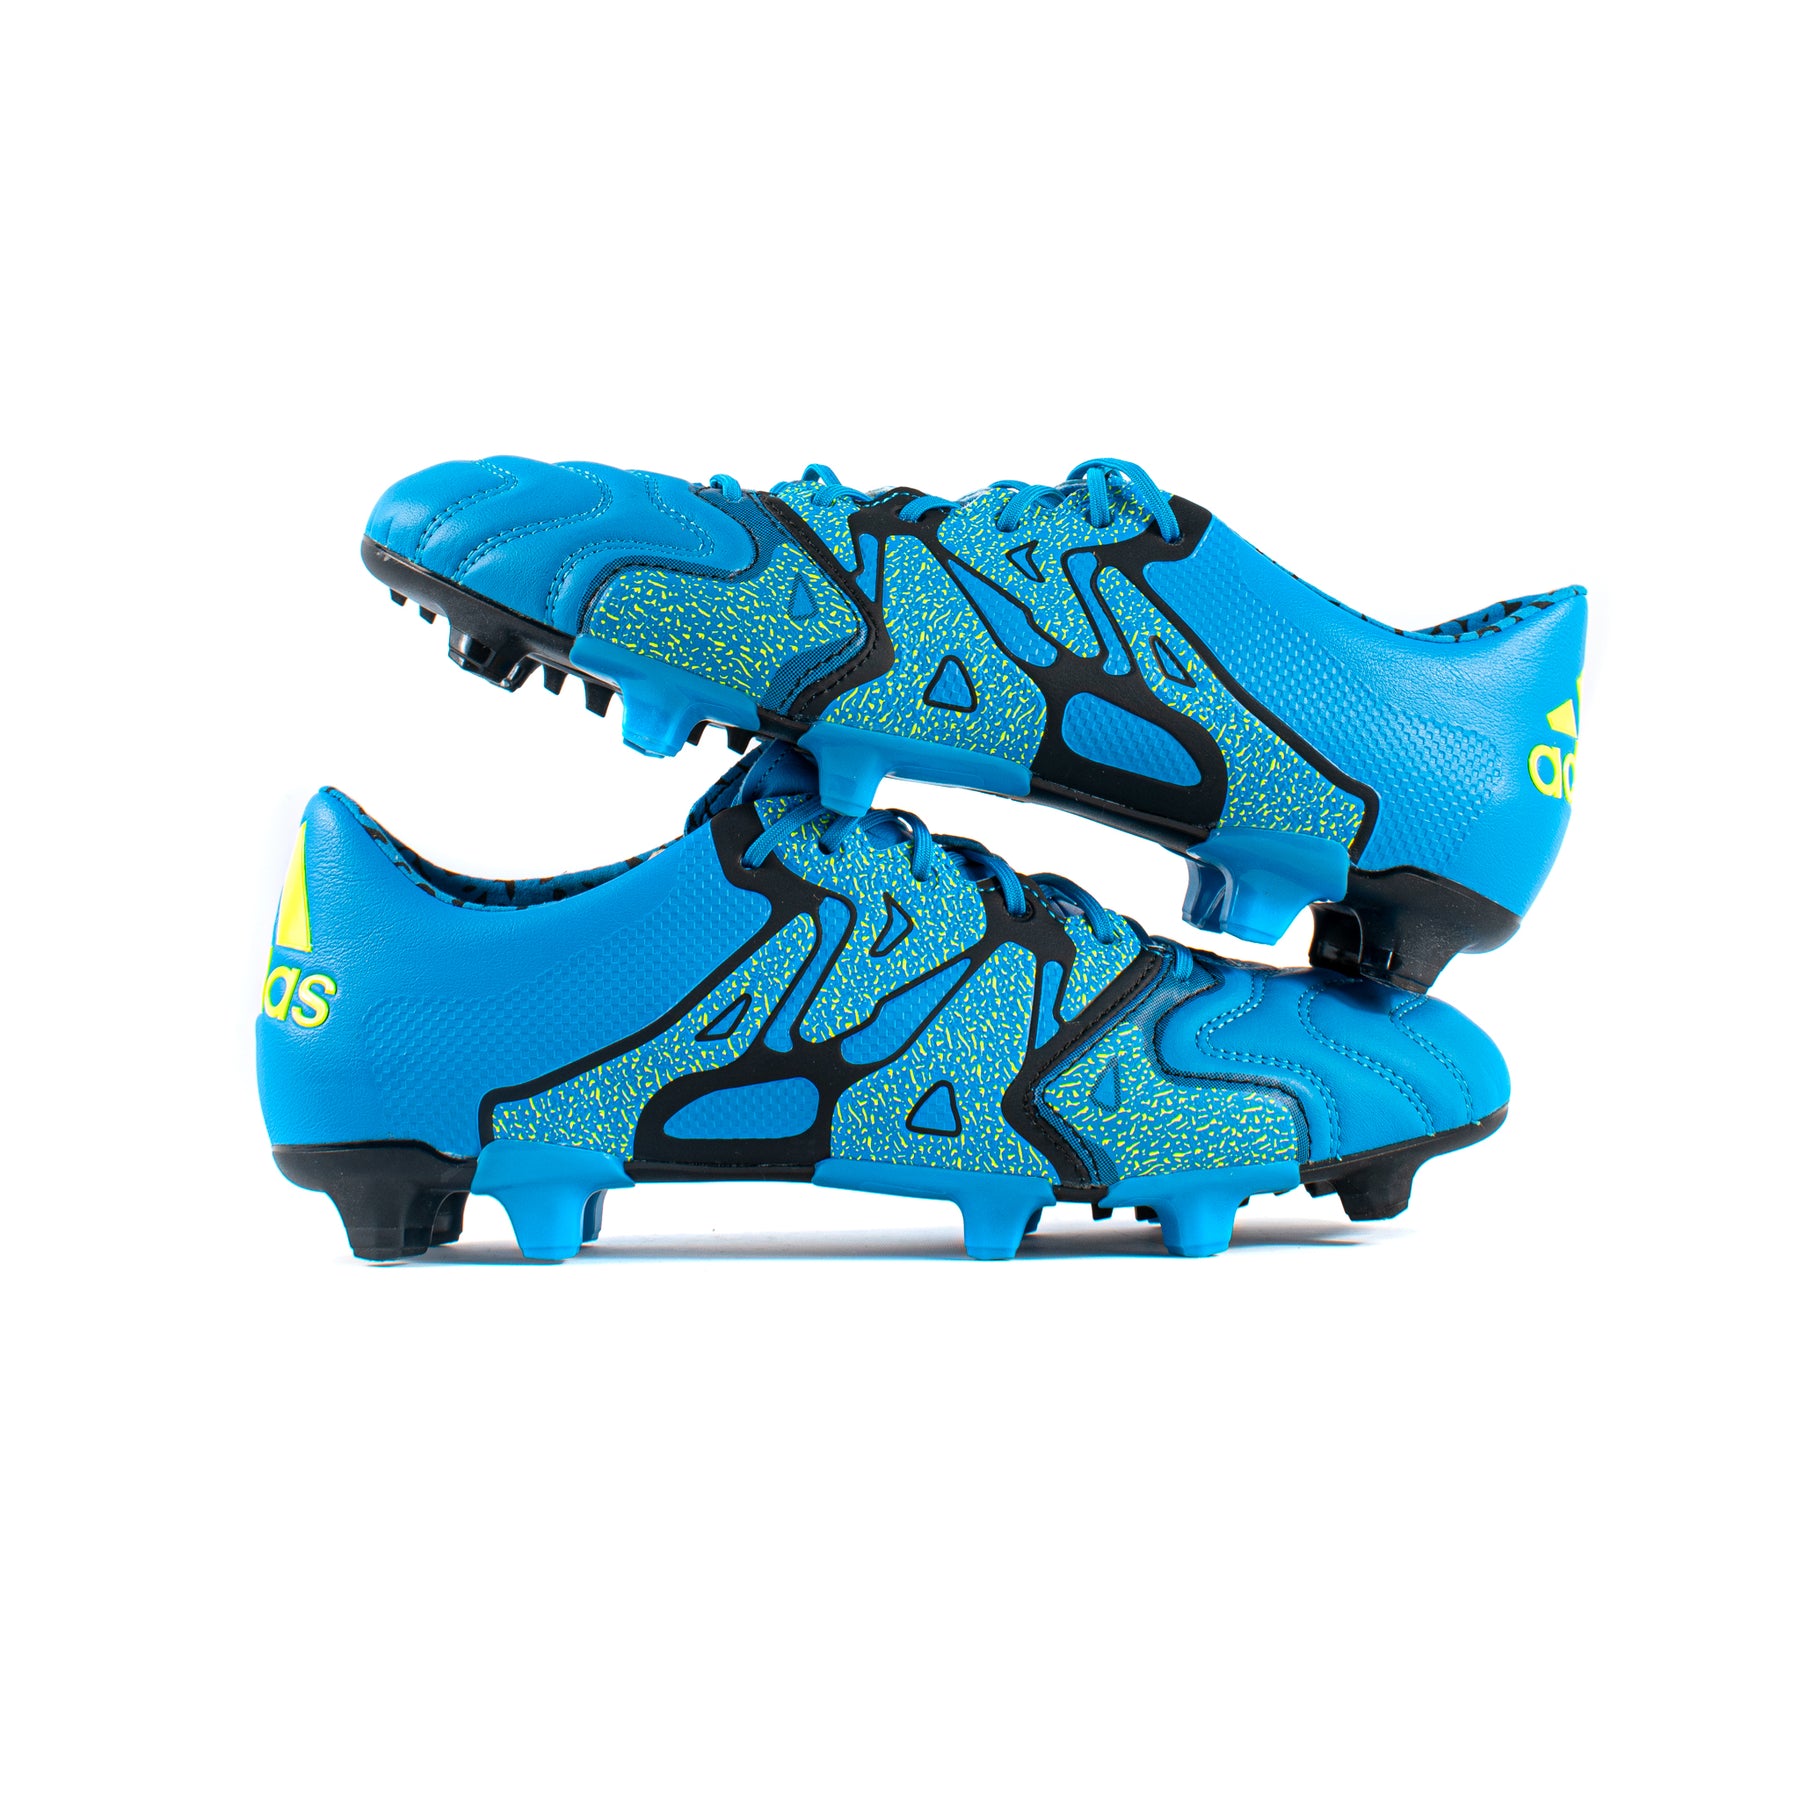 Adidas X15.1 Blue Leather FG – Classic Soccer Cleats